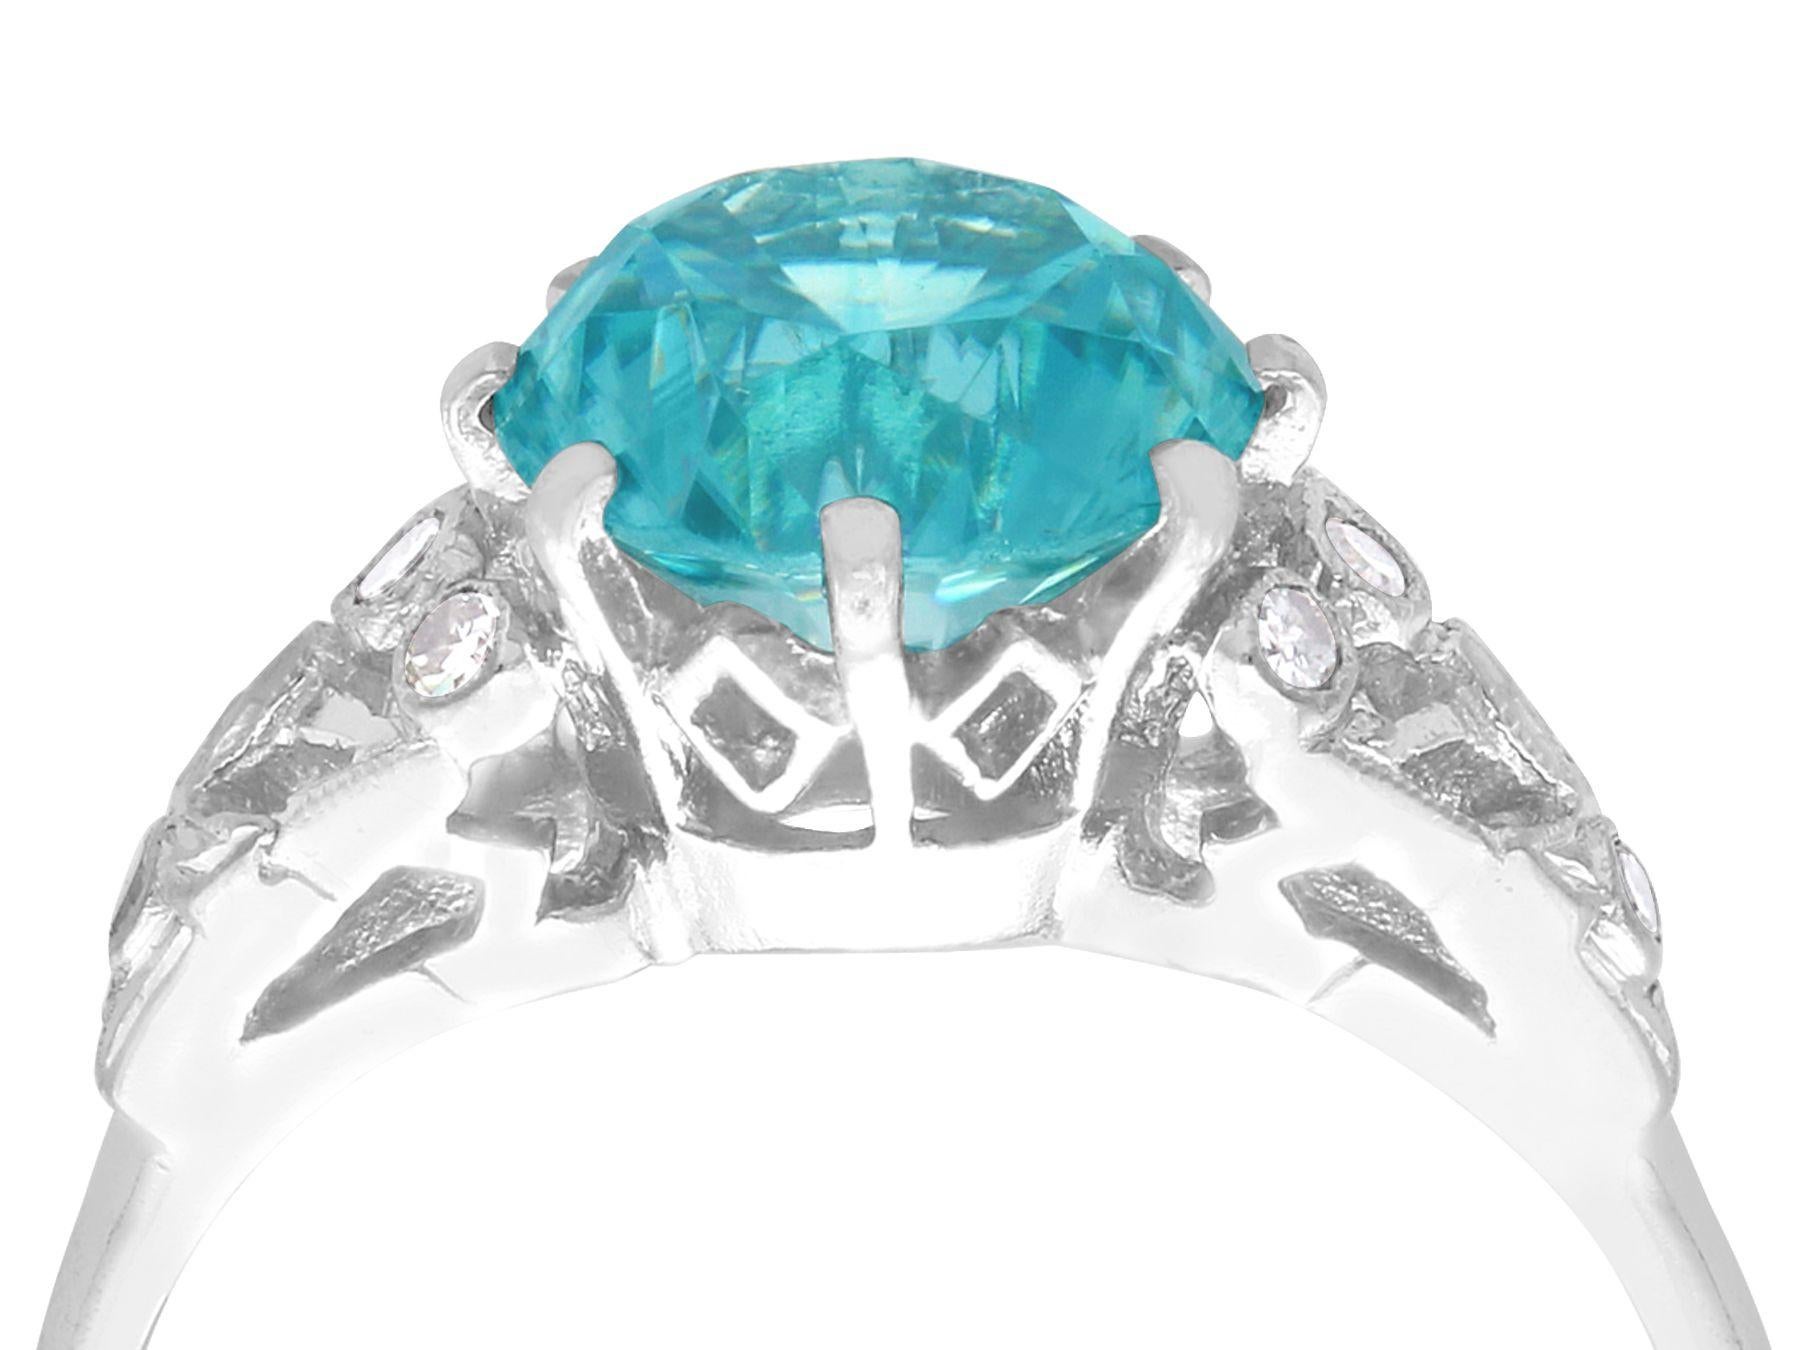 An impressive antique 1920s 3.45 carat high zircon and 18 karat white gold cocktail ring; part of our diverse antique jewelry and estate jewelry collections.

This fine and impressive zircon and diamond ring has been crafted in 18k white gold.

The